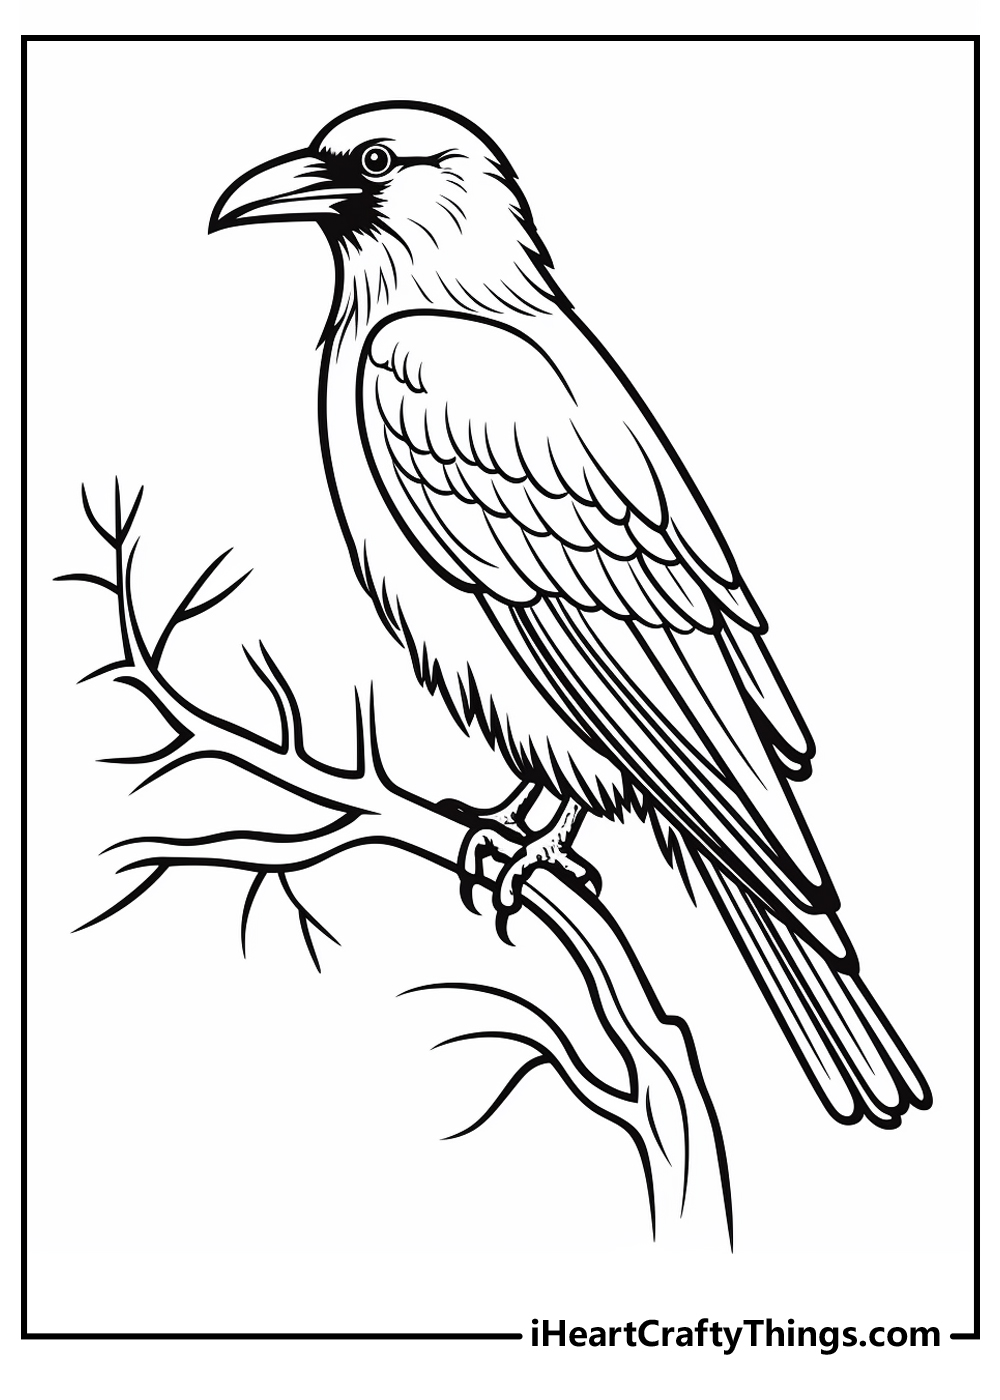 black-and-white raven coloring printable